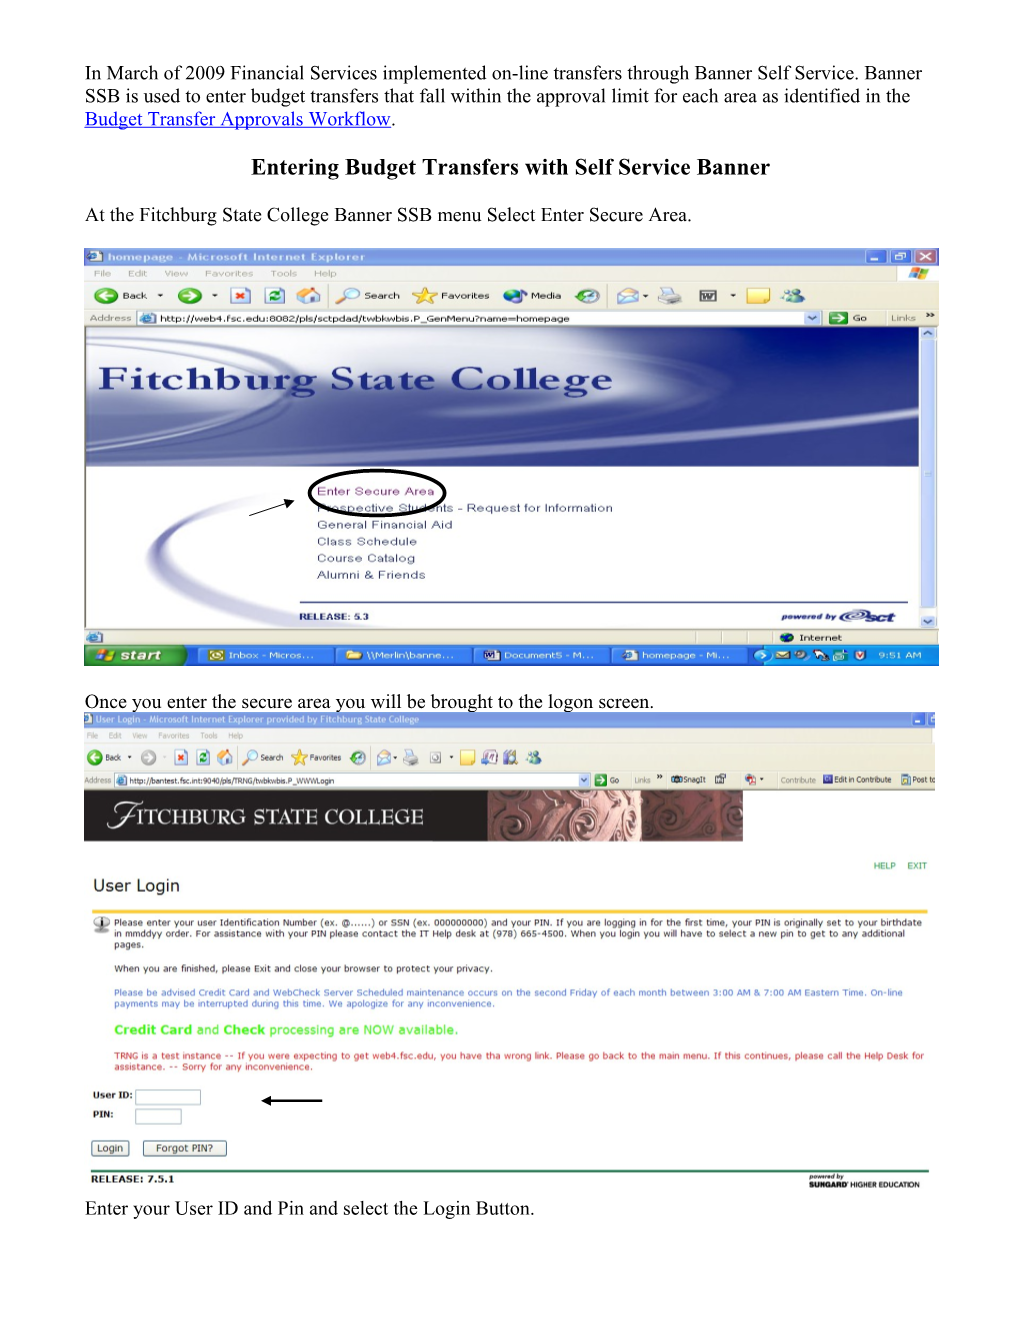 Entering Budget Transfers on the Web